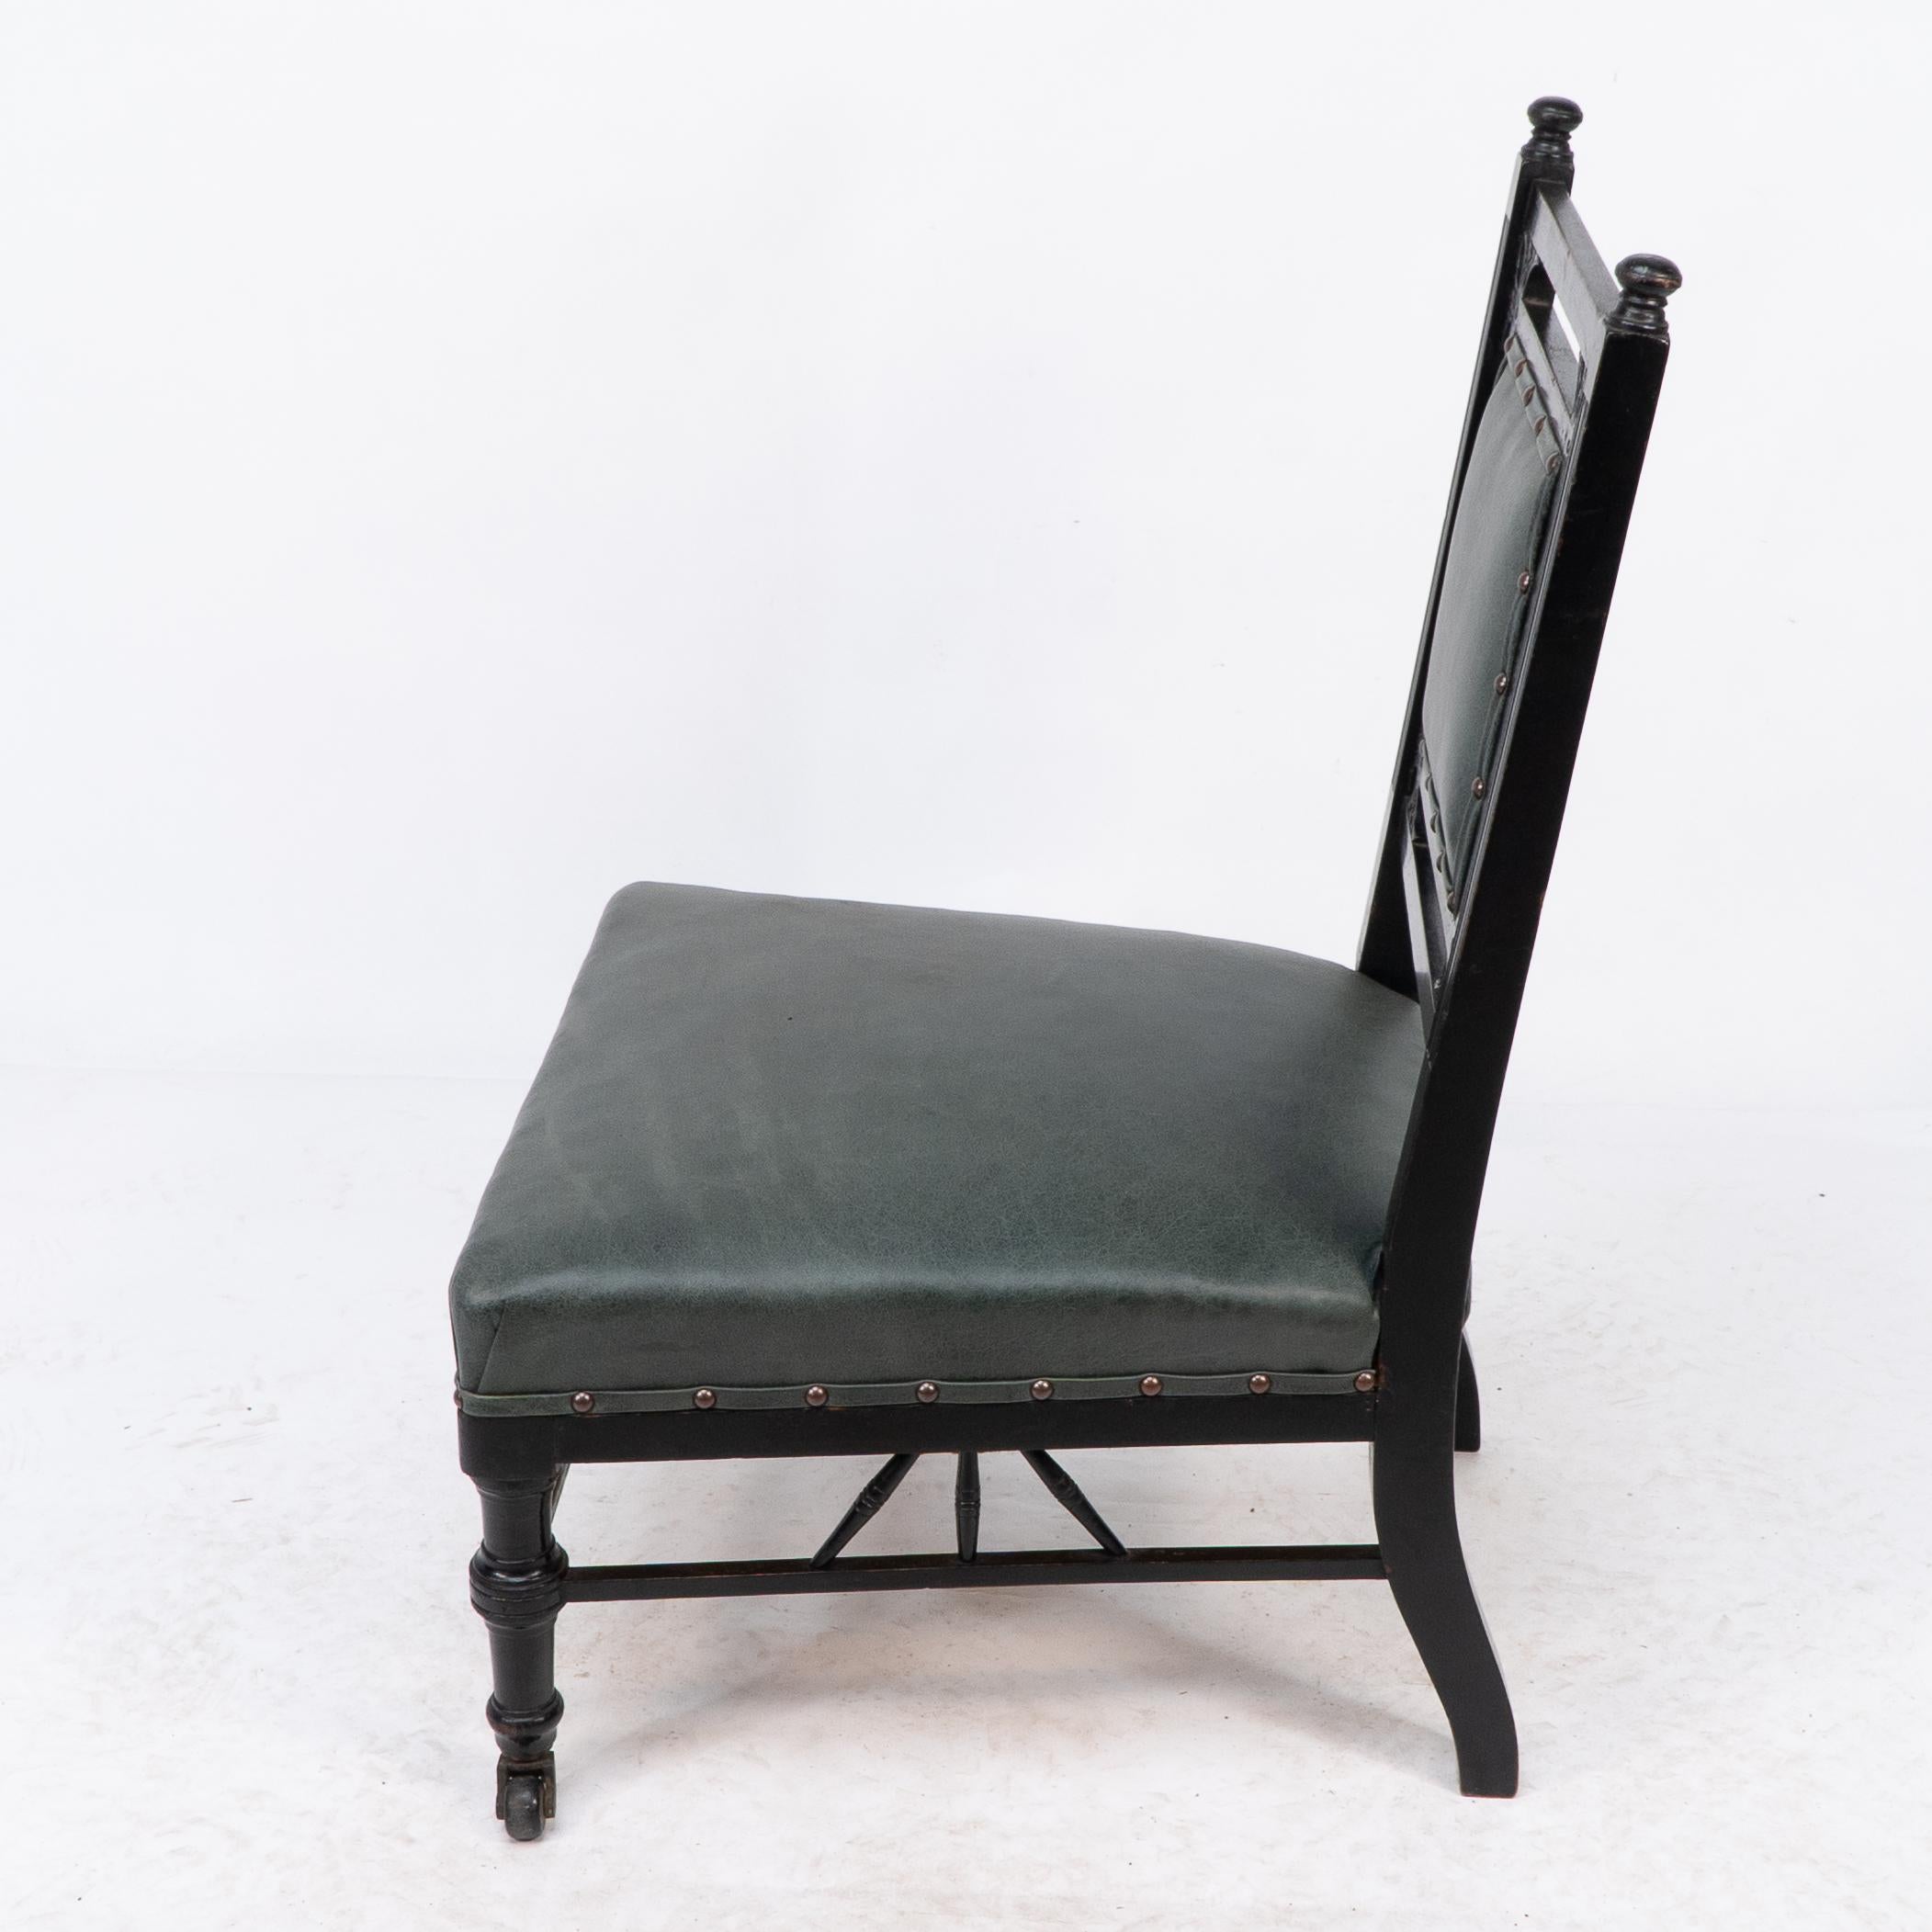 Ebonized E W Godwin style of. An Anglo-Japanese nursing chair with thebes style turnings For Sale